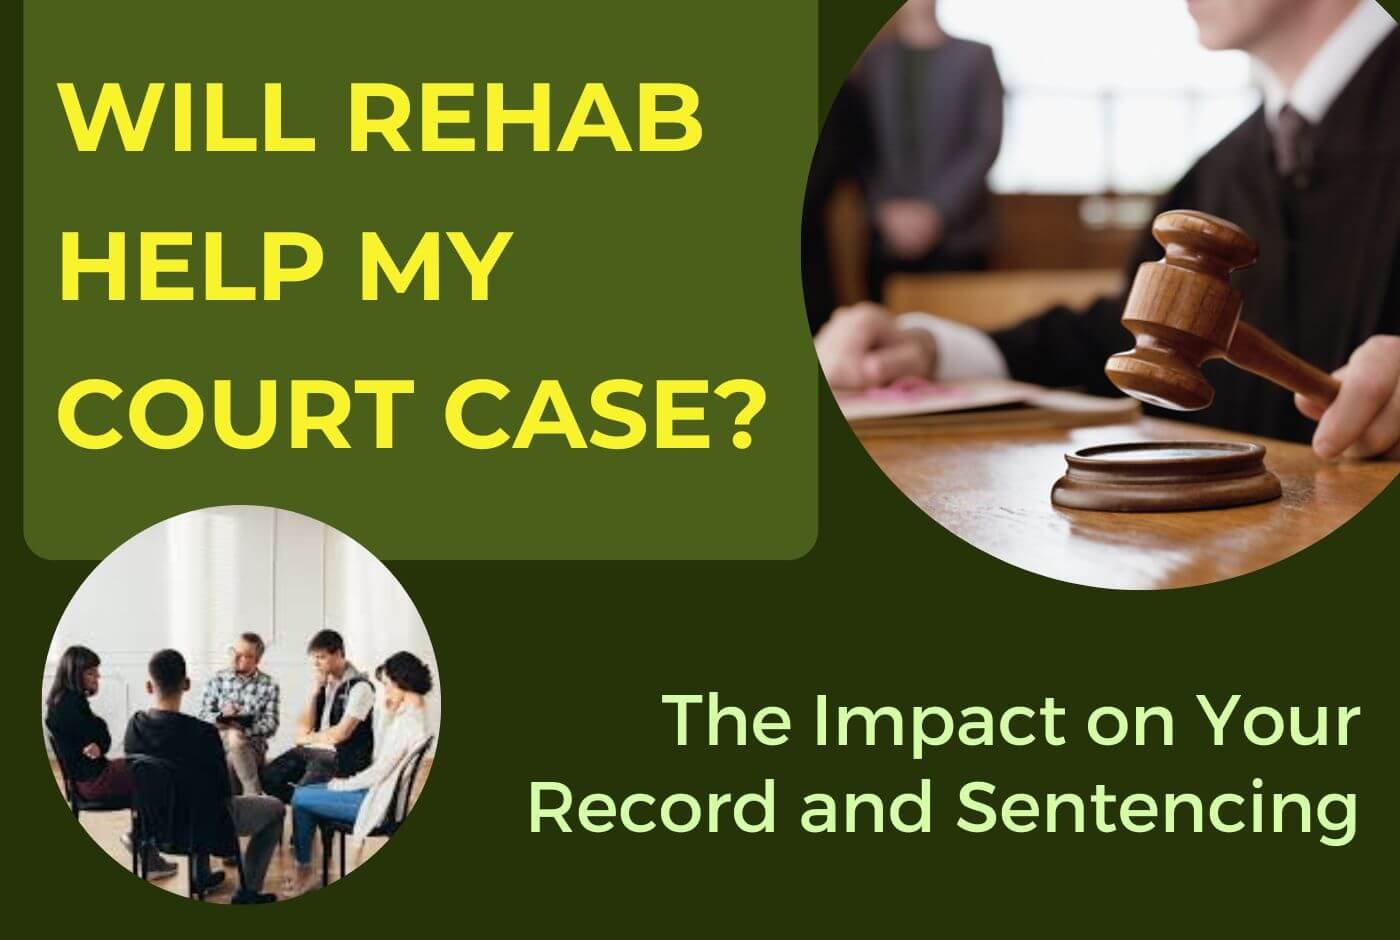 Will Rehab Help My Court Case? The Impact on Your Record and Sentencing